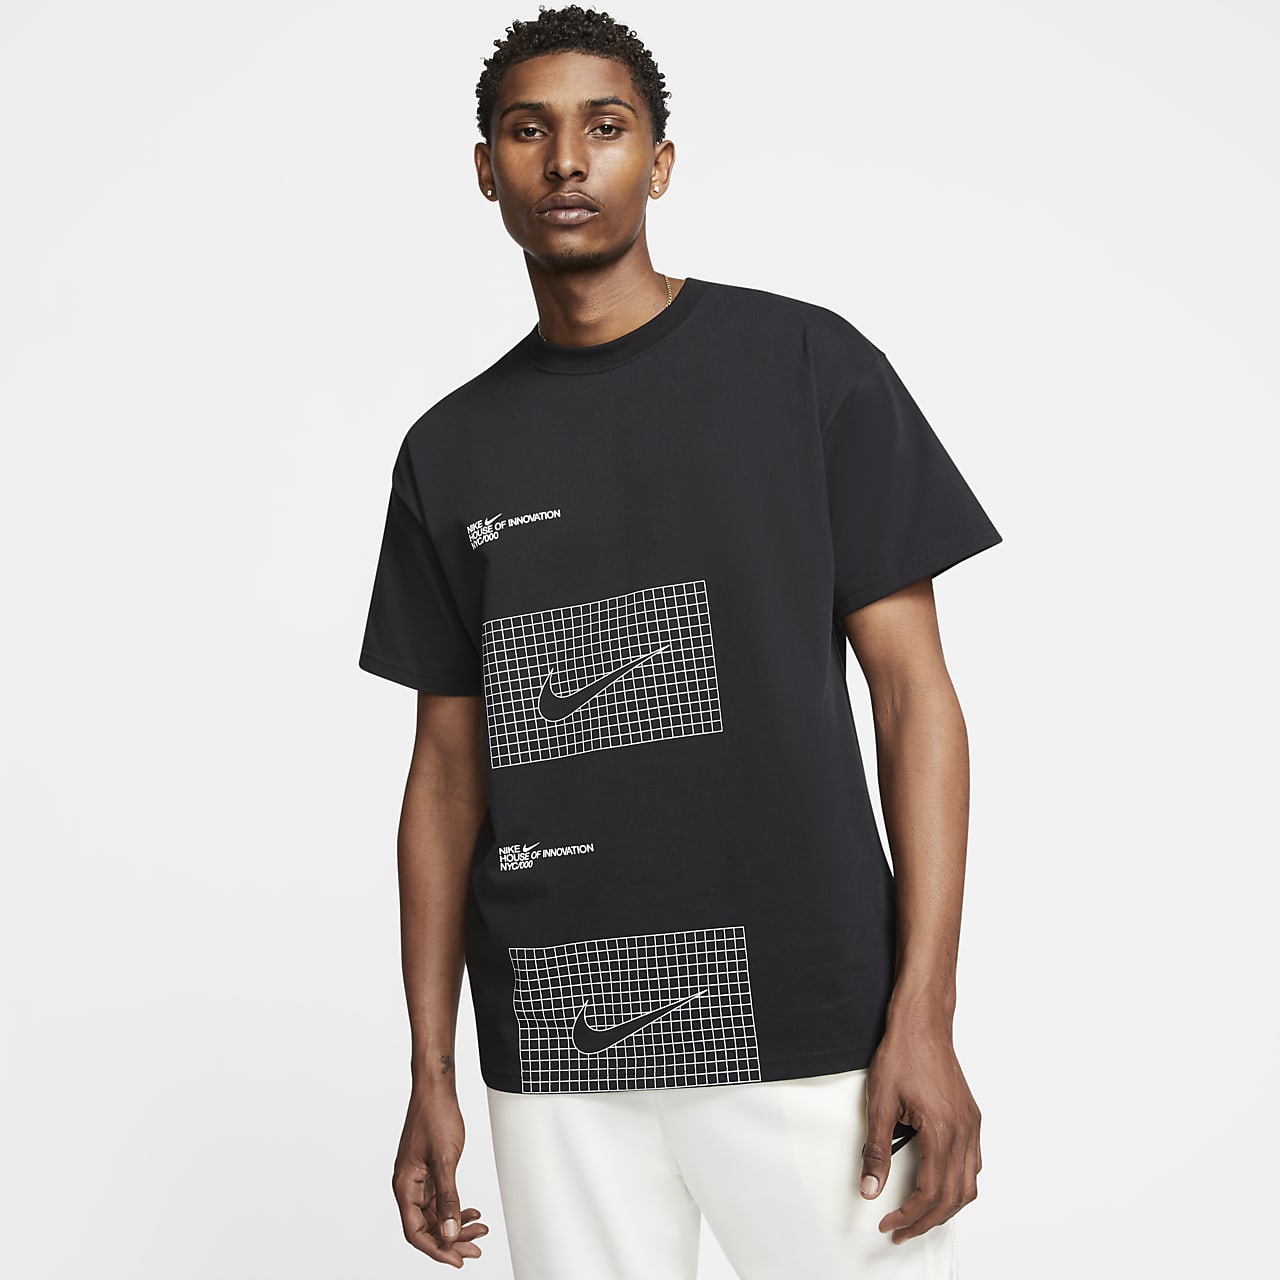 Nike Sportswear House of Innovation (NYC) Men's Loose Fit T-Shirt